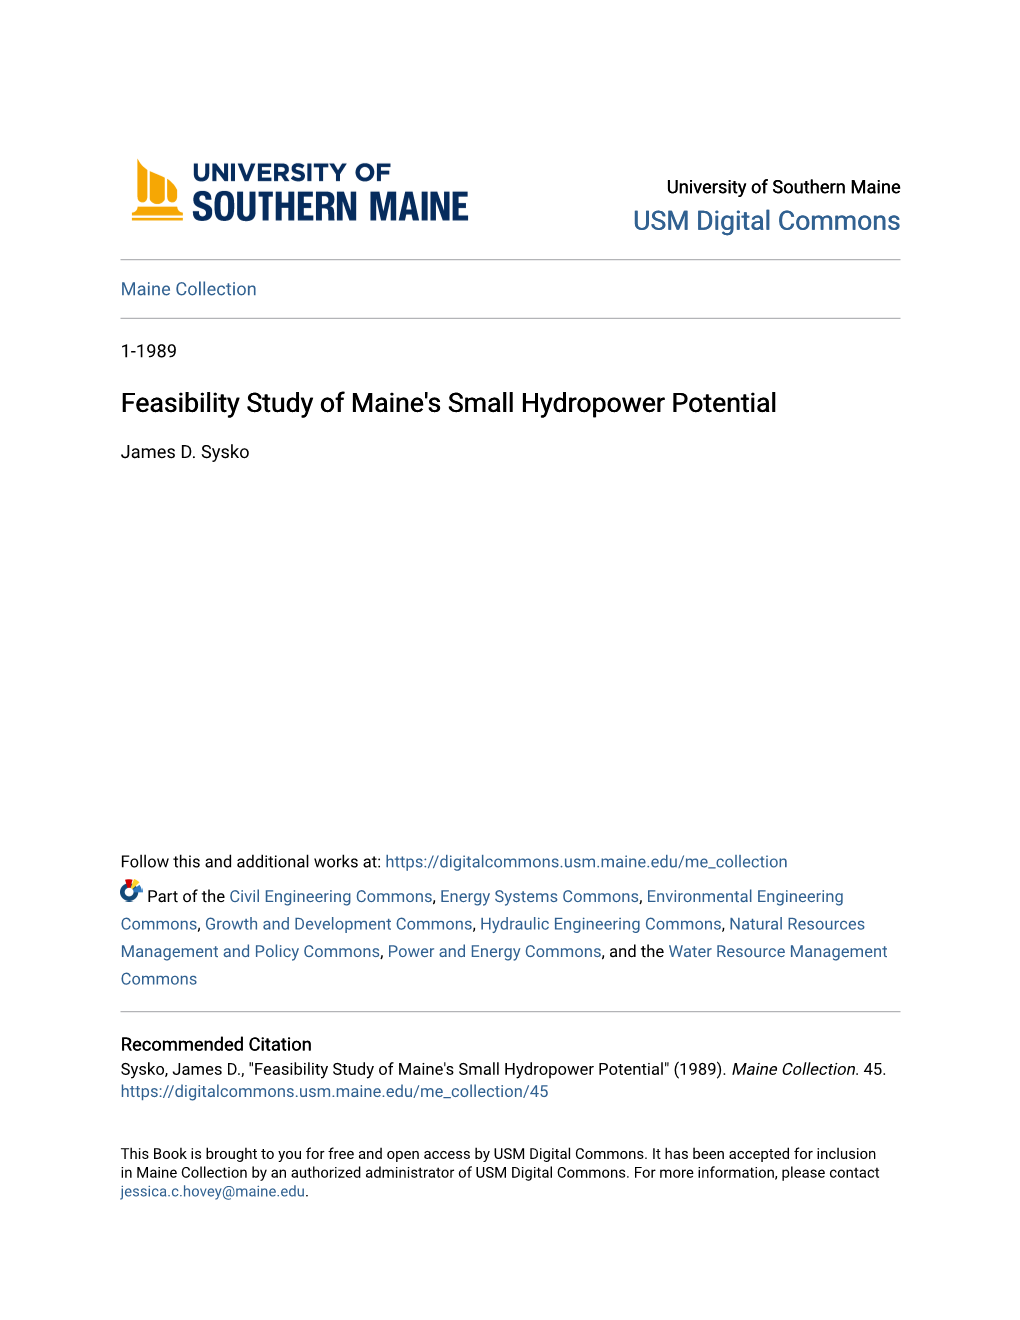 Feasibility Study of Maine's Small Hydropower Potential